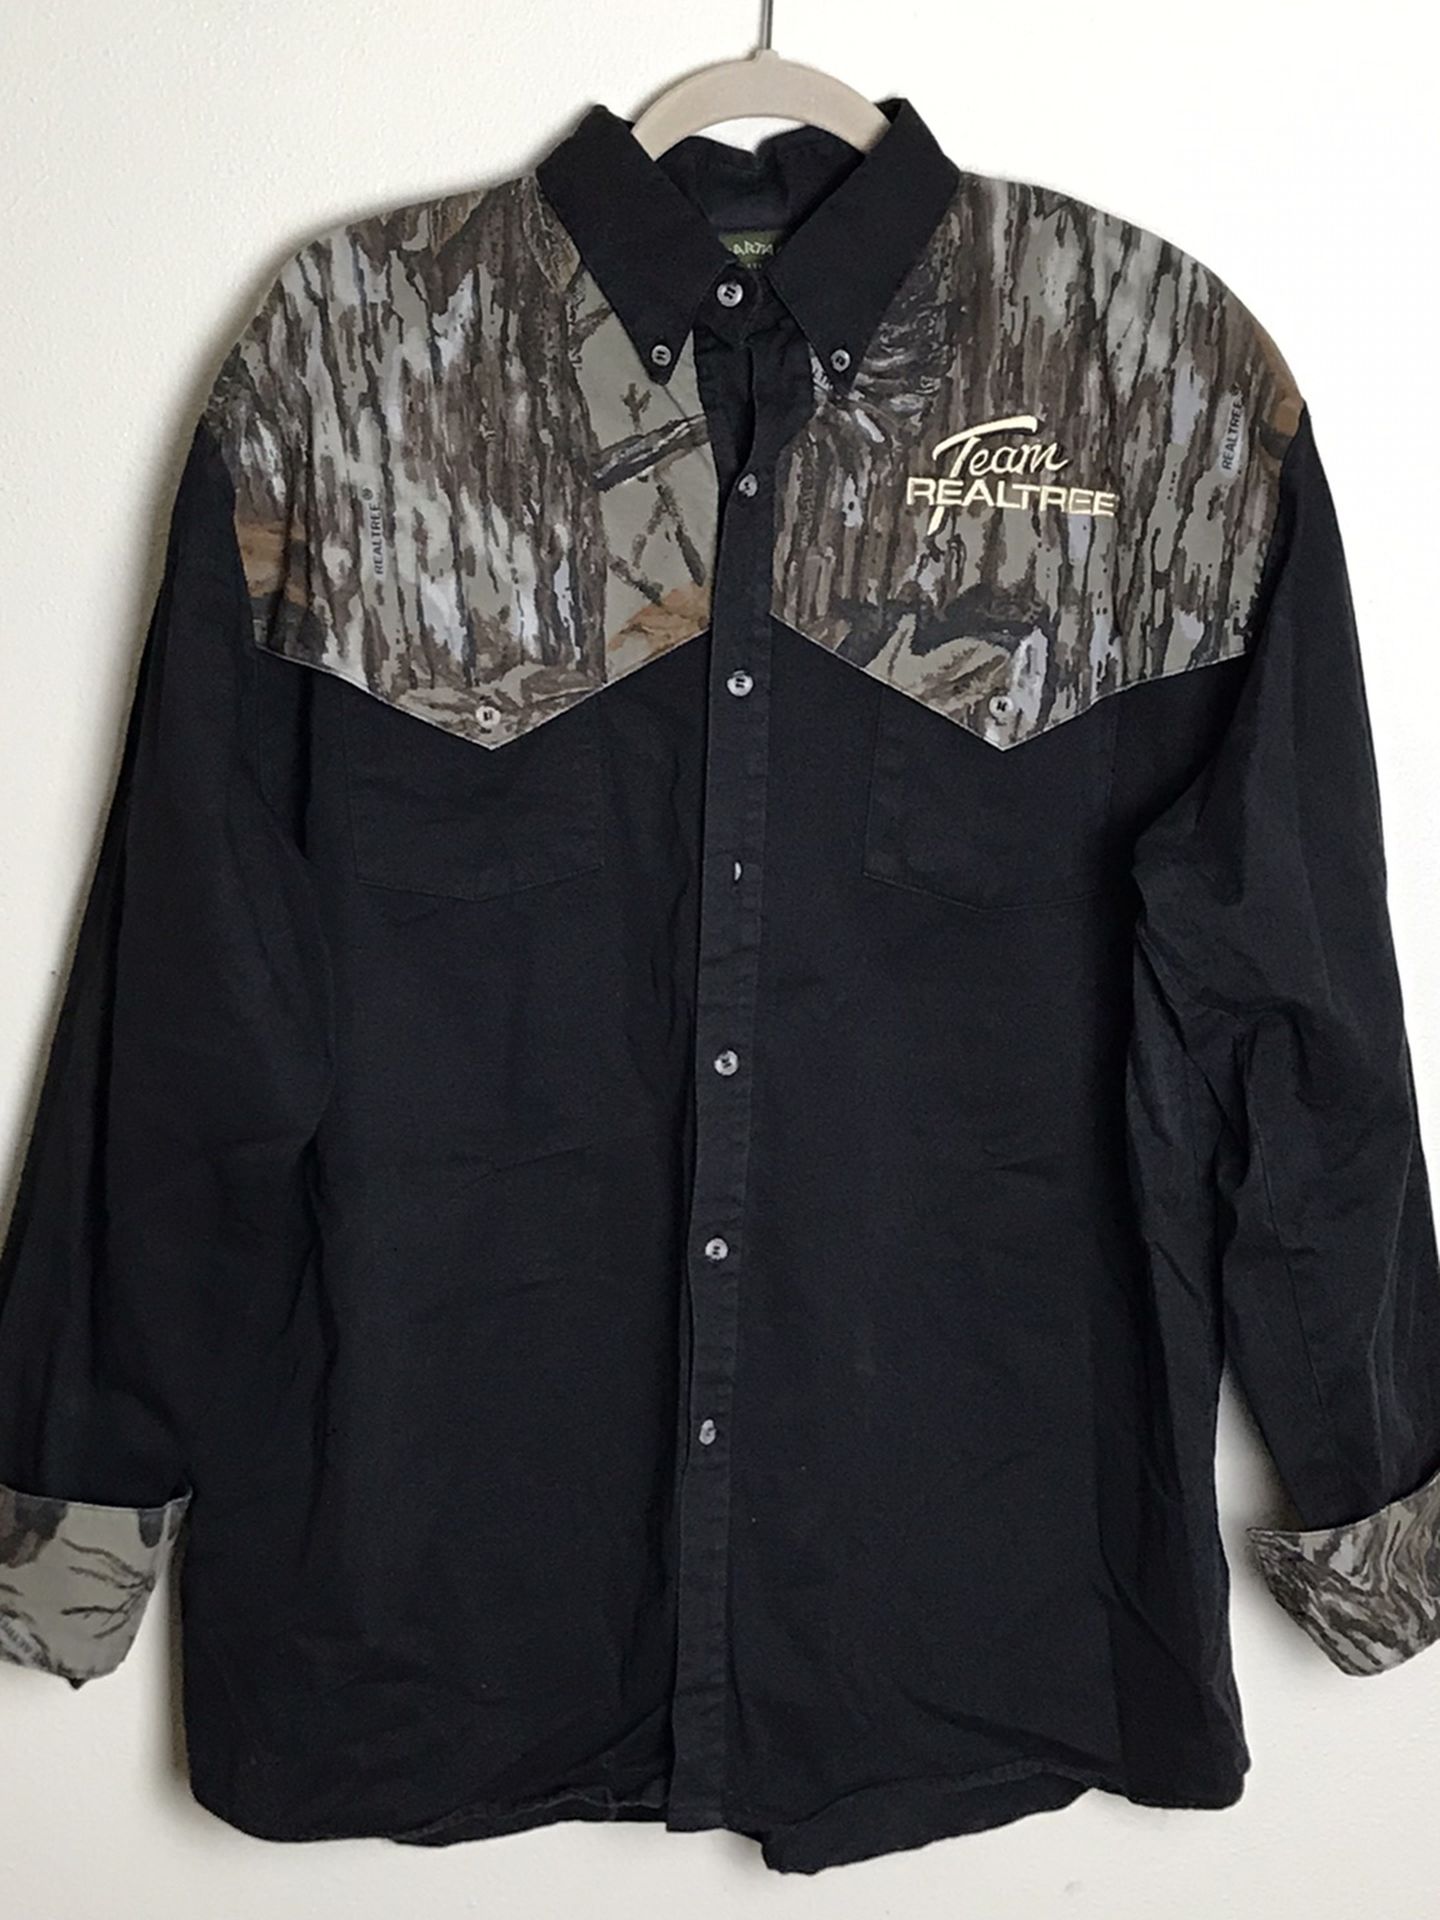 spartan Realtree two tone camo button up shirts Size M Gently used